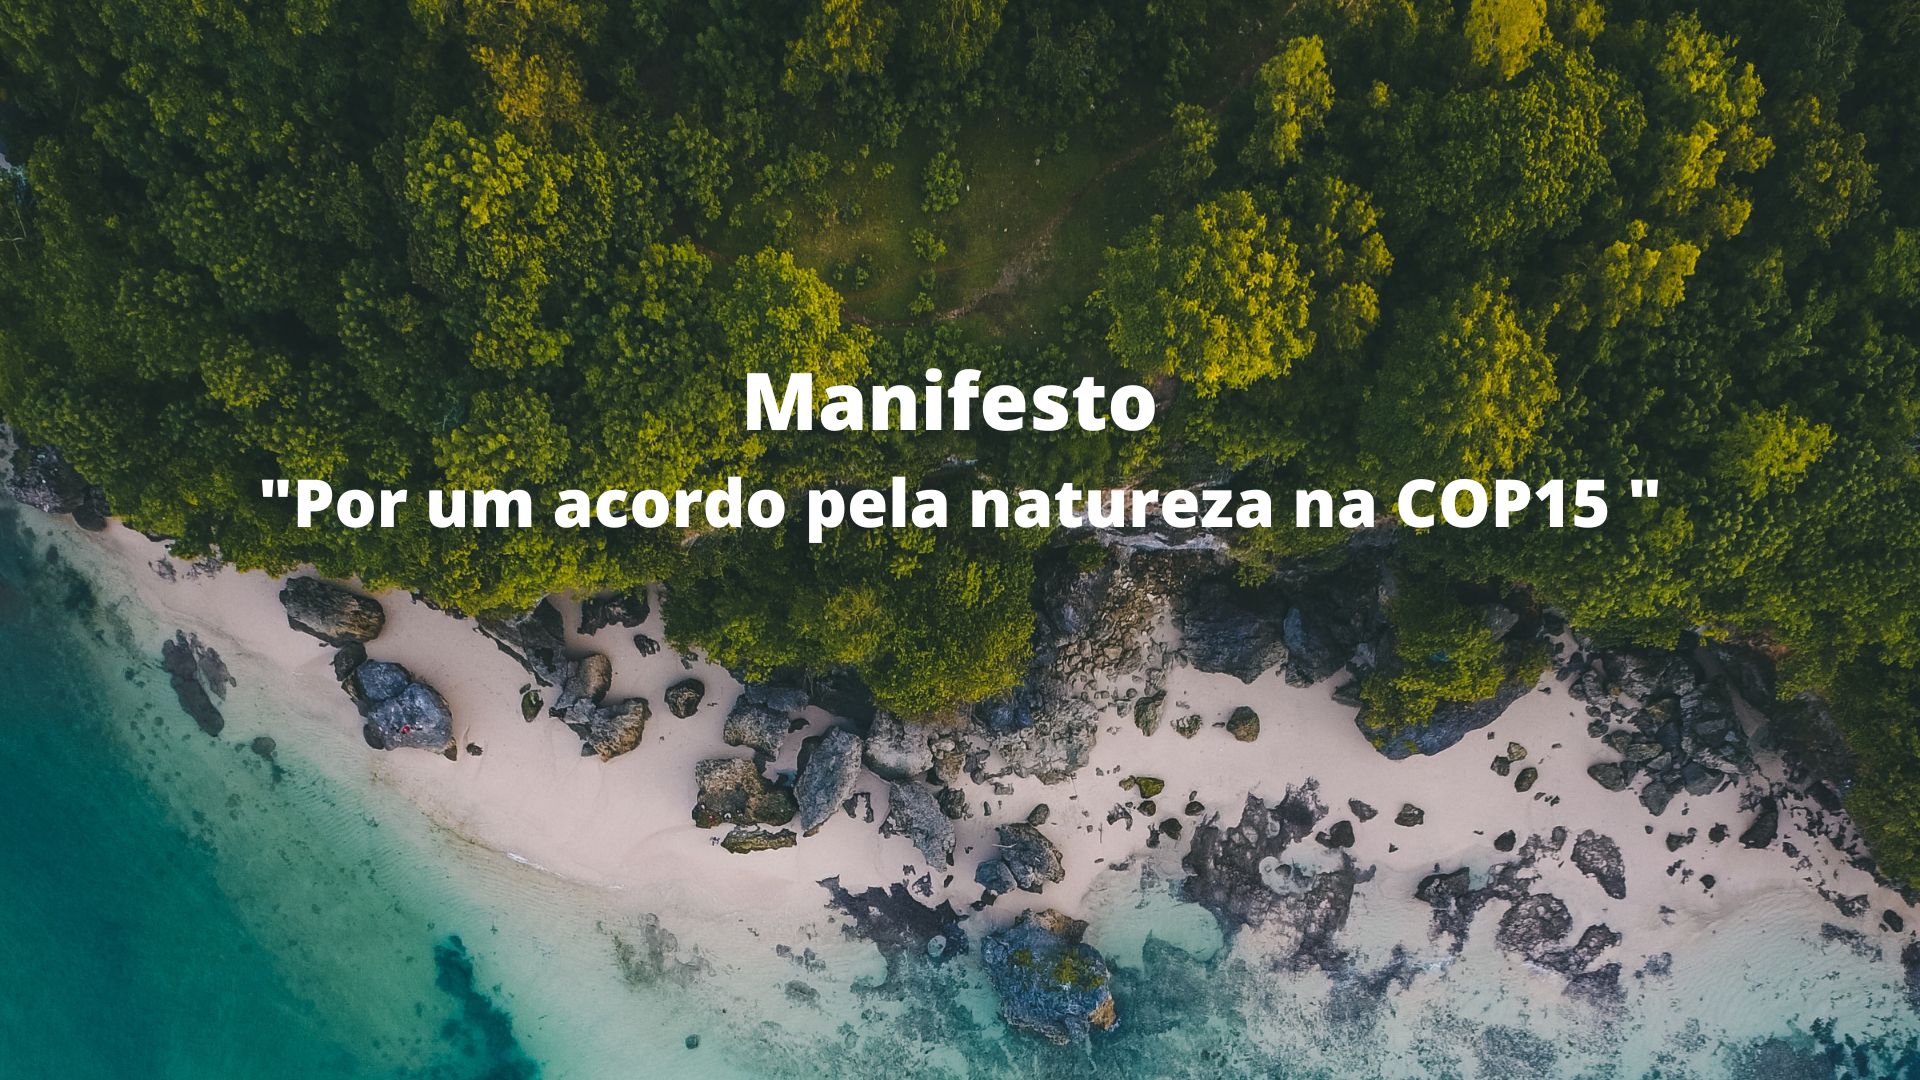 The Altri Group signed the BCSD Portugal Manifesto For an agreement for Nature at COP15